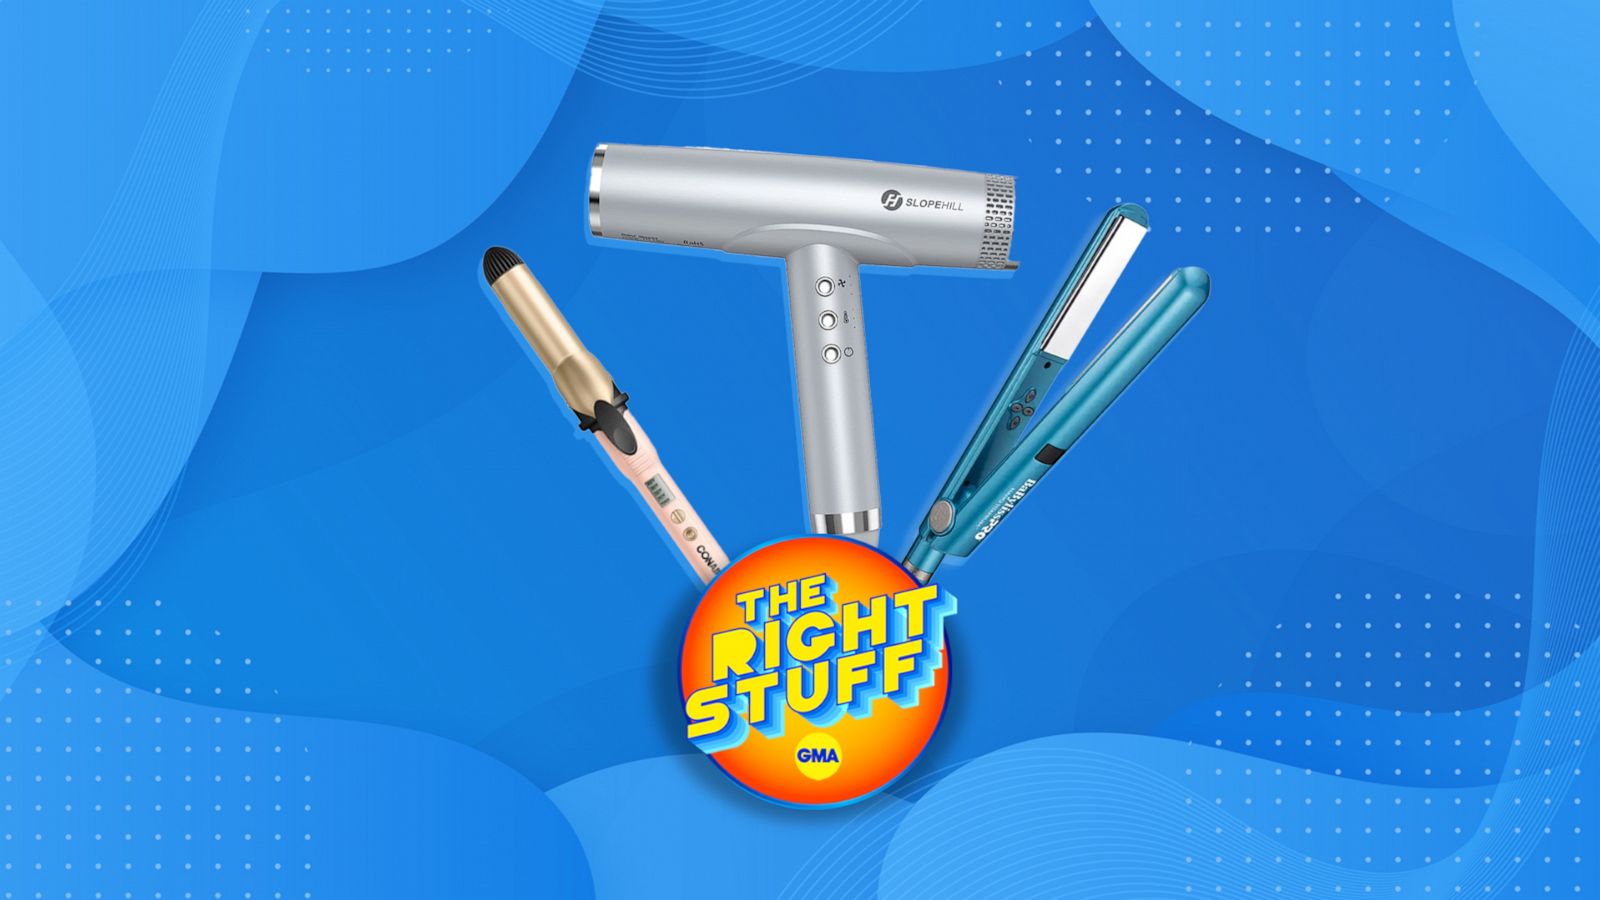 Get red carpet-ready with the best hair tools Shop curlers, hair dryers and more